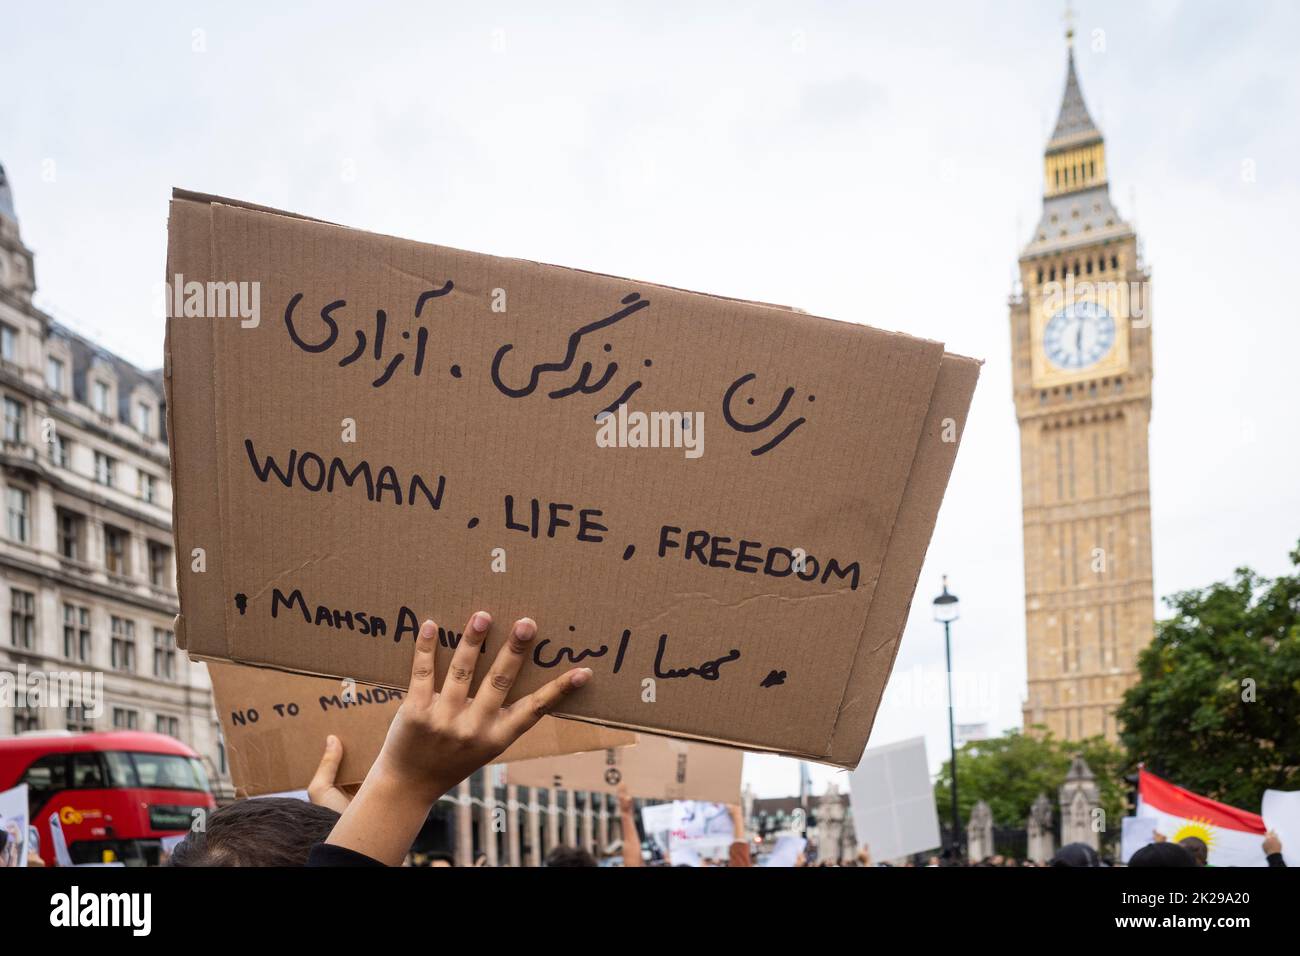 London, UK.  22 September 2022.  A woman with a sign during a protest in Parliament Square by Iranians living in London reacting to news of the death, on 16 September of Mahsa Amini, a 22-year-old Kurdish woman, who died in police custody in Tehran.  Allegedly, she had been detained by Iran’s morality police for wearing a hijab headscarf in an “improper” way.  Protests are taking place in Iran and the access to the internet and social media is now being restricted. Credit: Stephen Chung / Alamy Live News Stock Photo